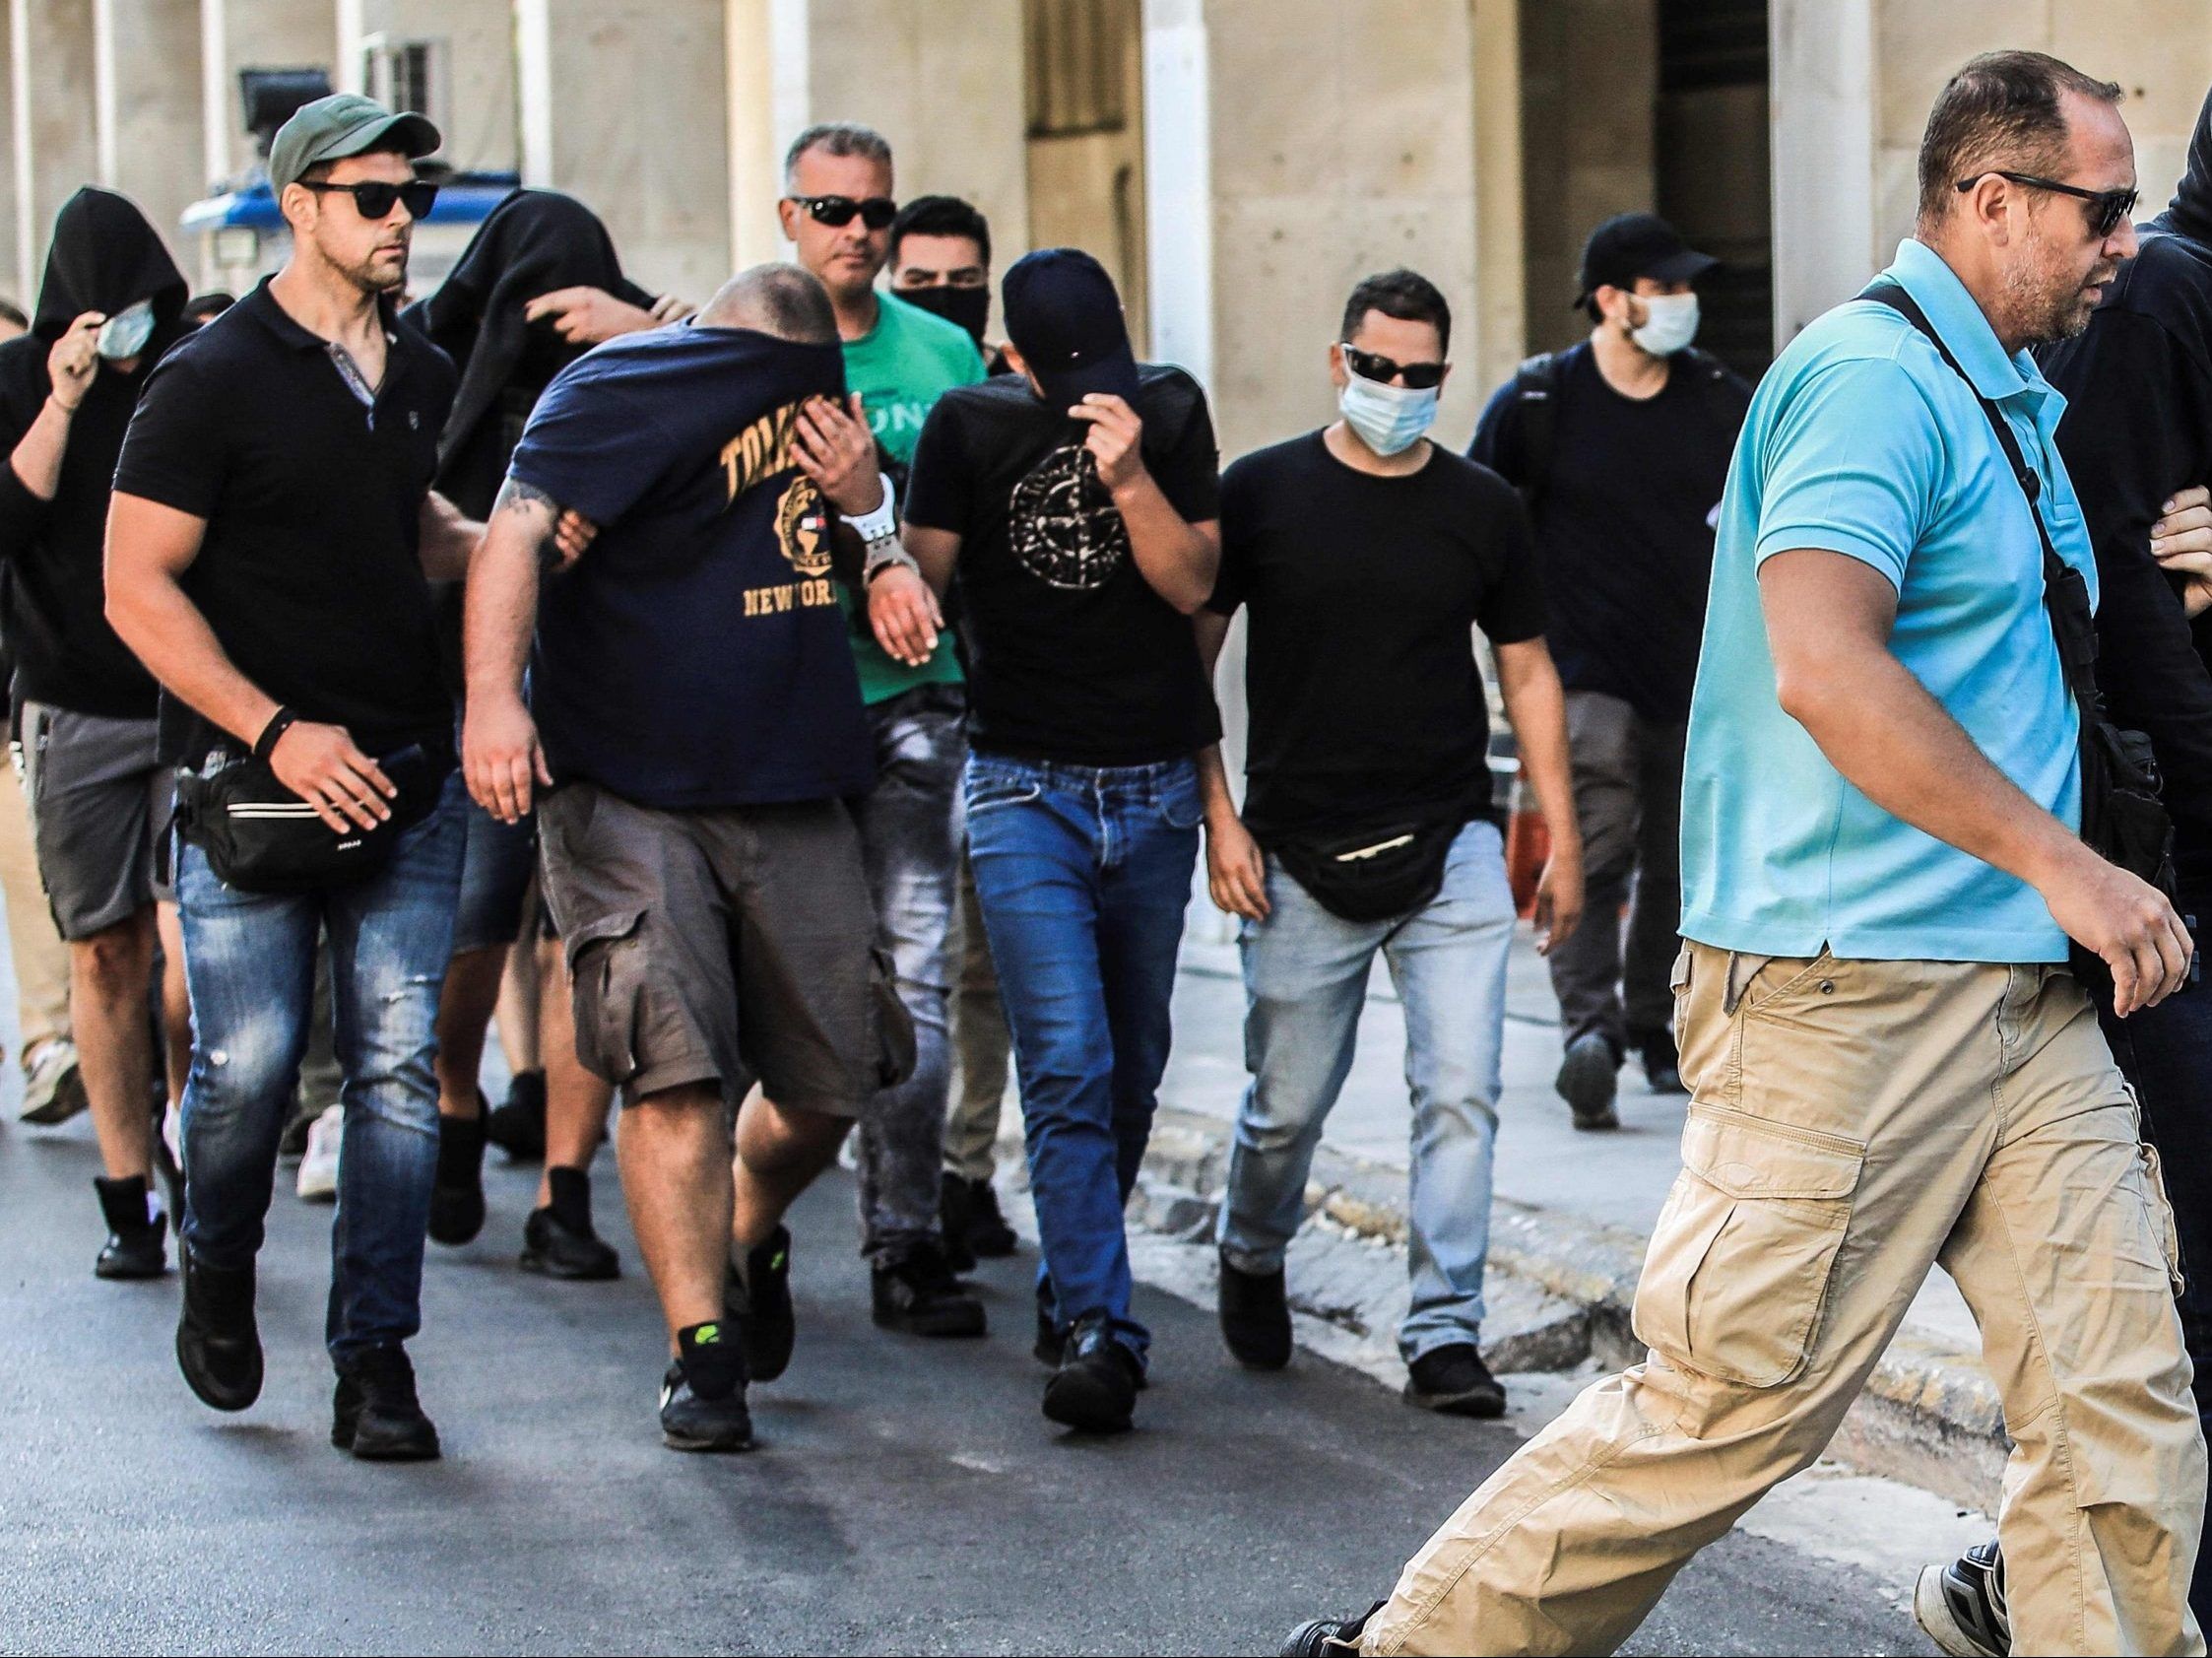 Nearly 100 soccer fans face murder, gang-related charges in Greece Toronto pic